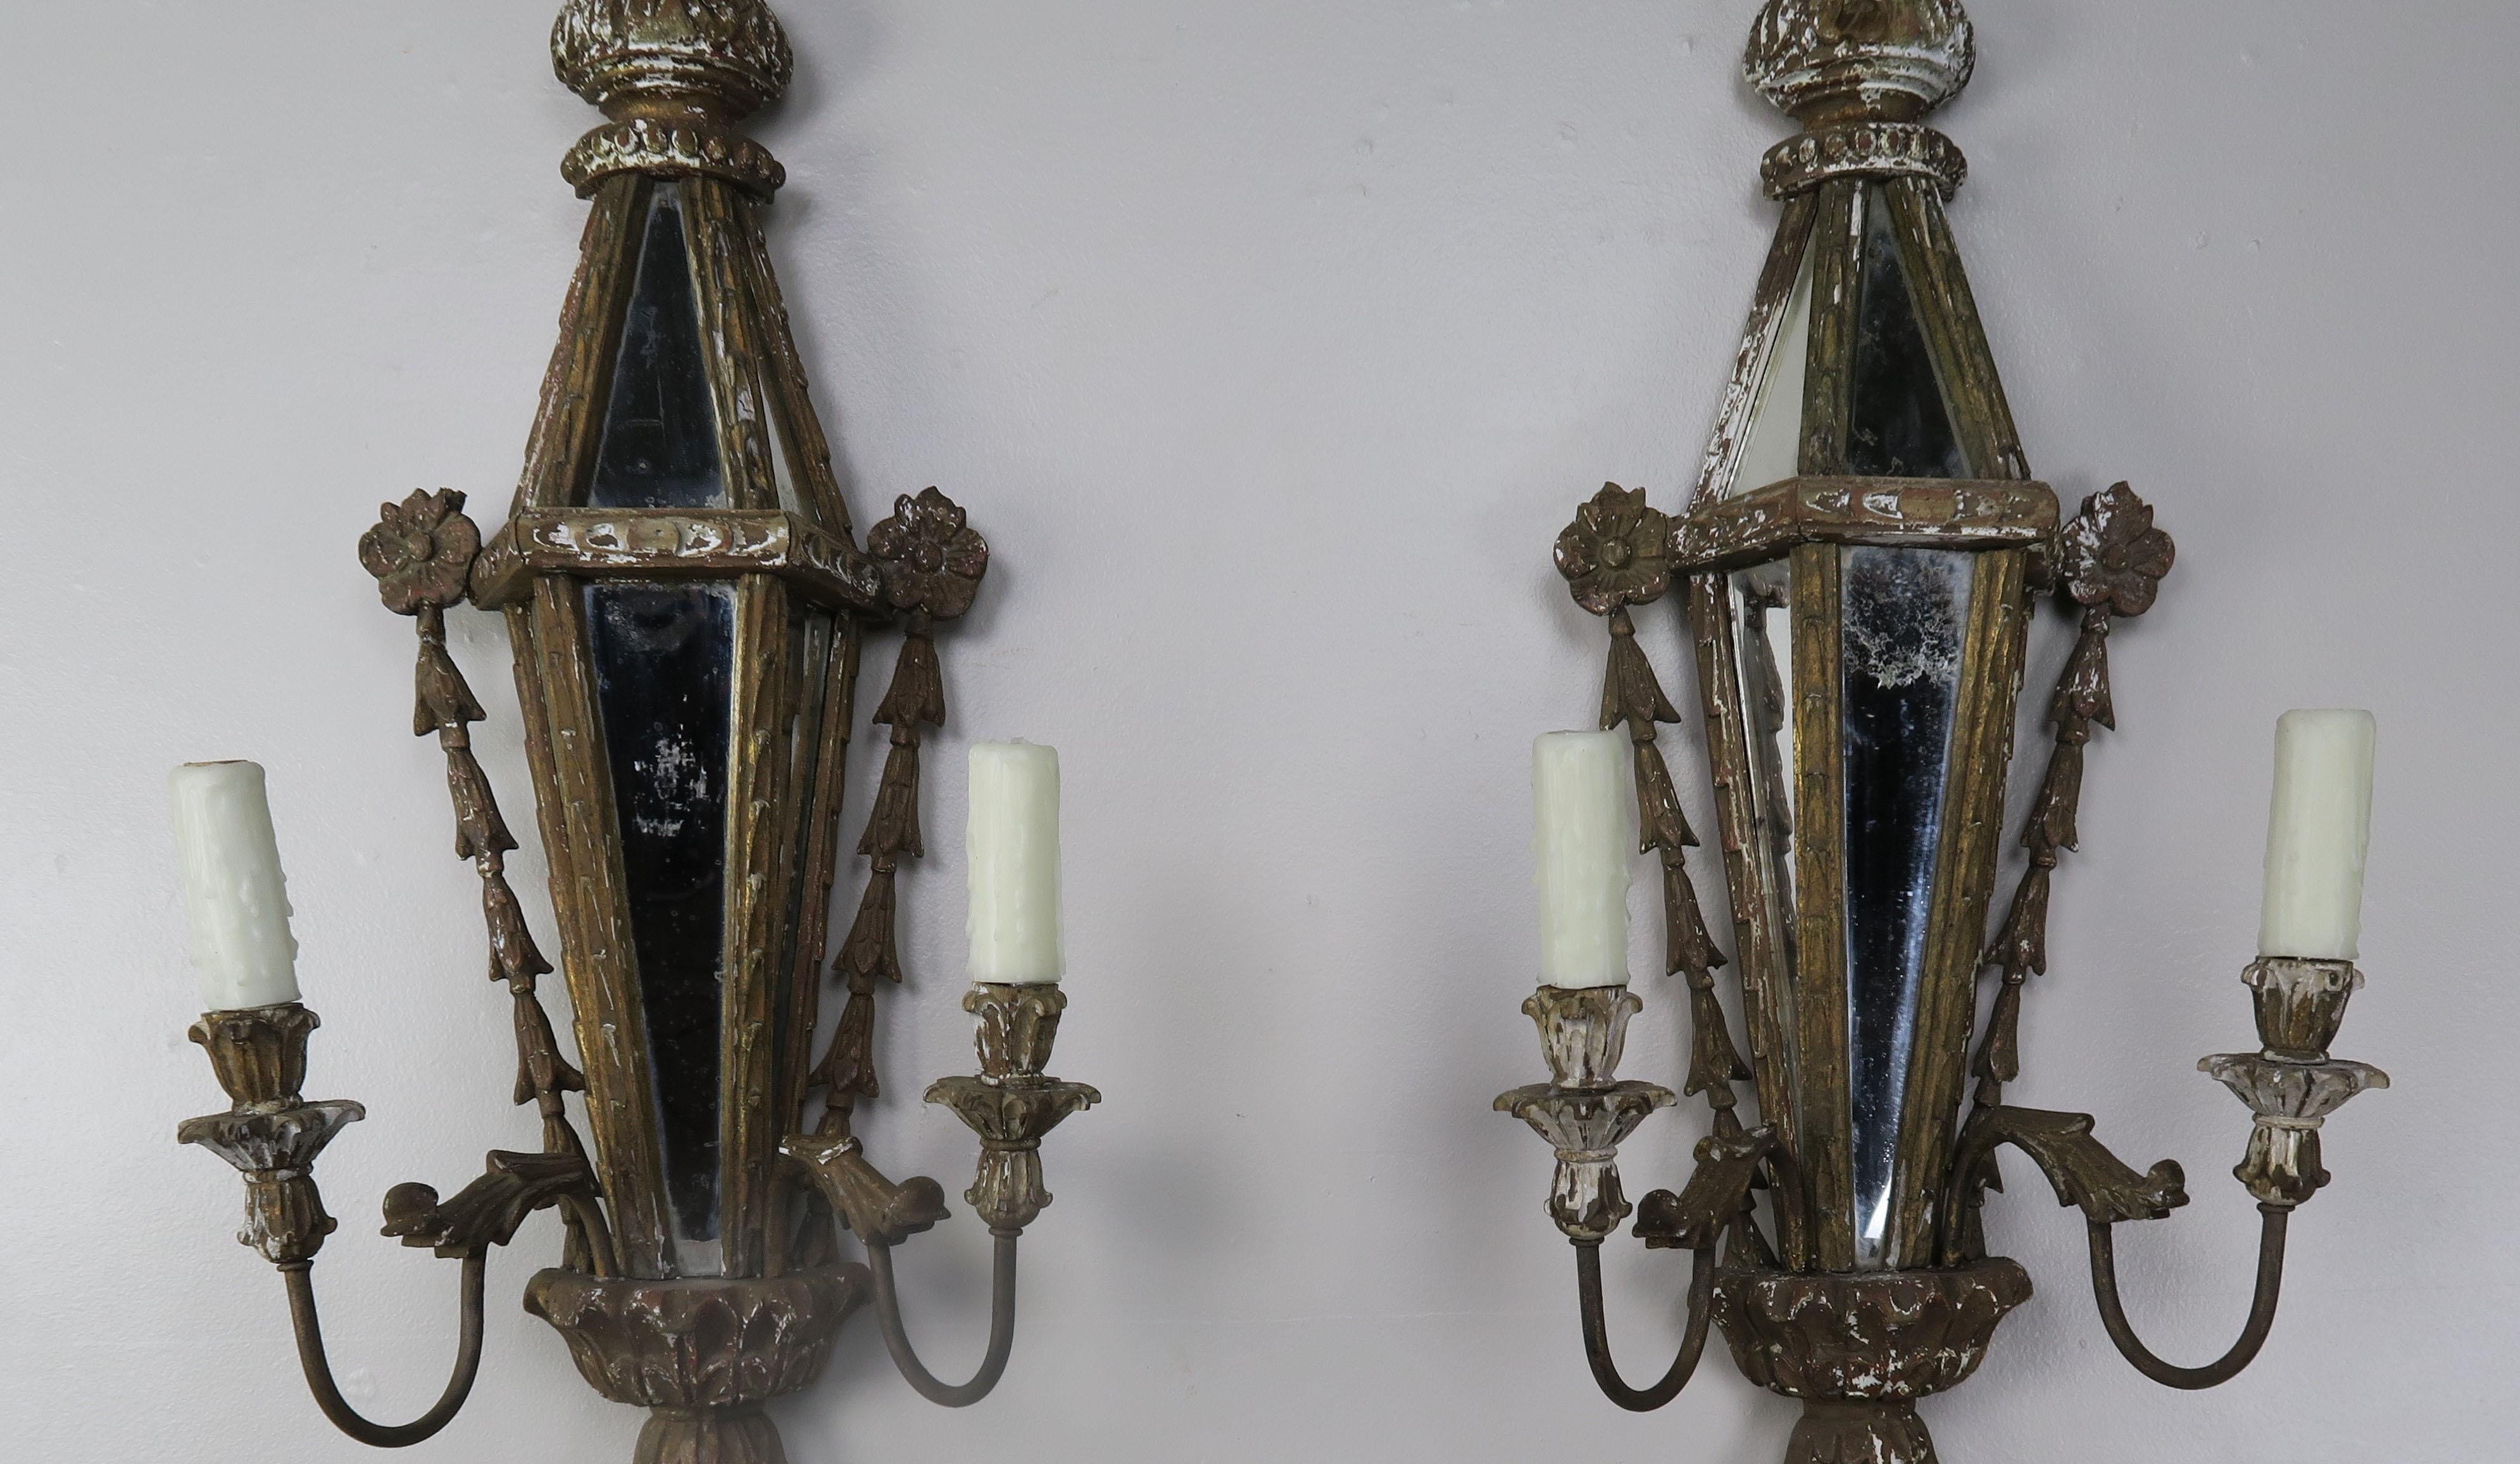 A pair of carved wood Venetian mirrored two light sconces that are beautifully carved with a shell motif at top and intricate carved details throughout. The sconces are newly rewired with drip wax candle covers and ready to install.